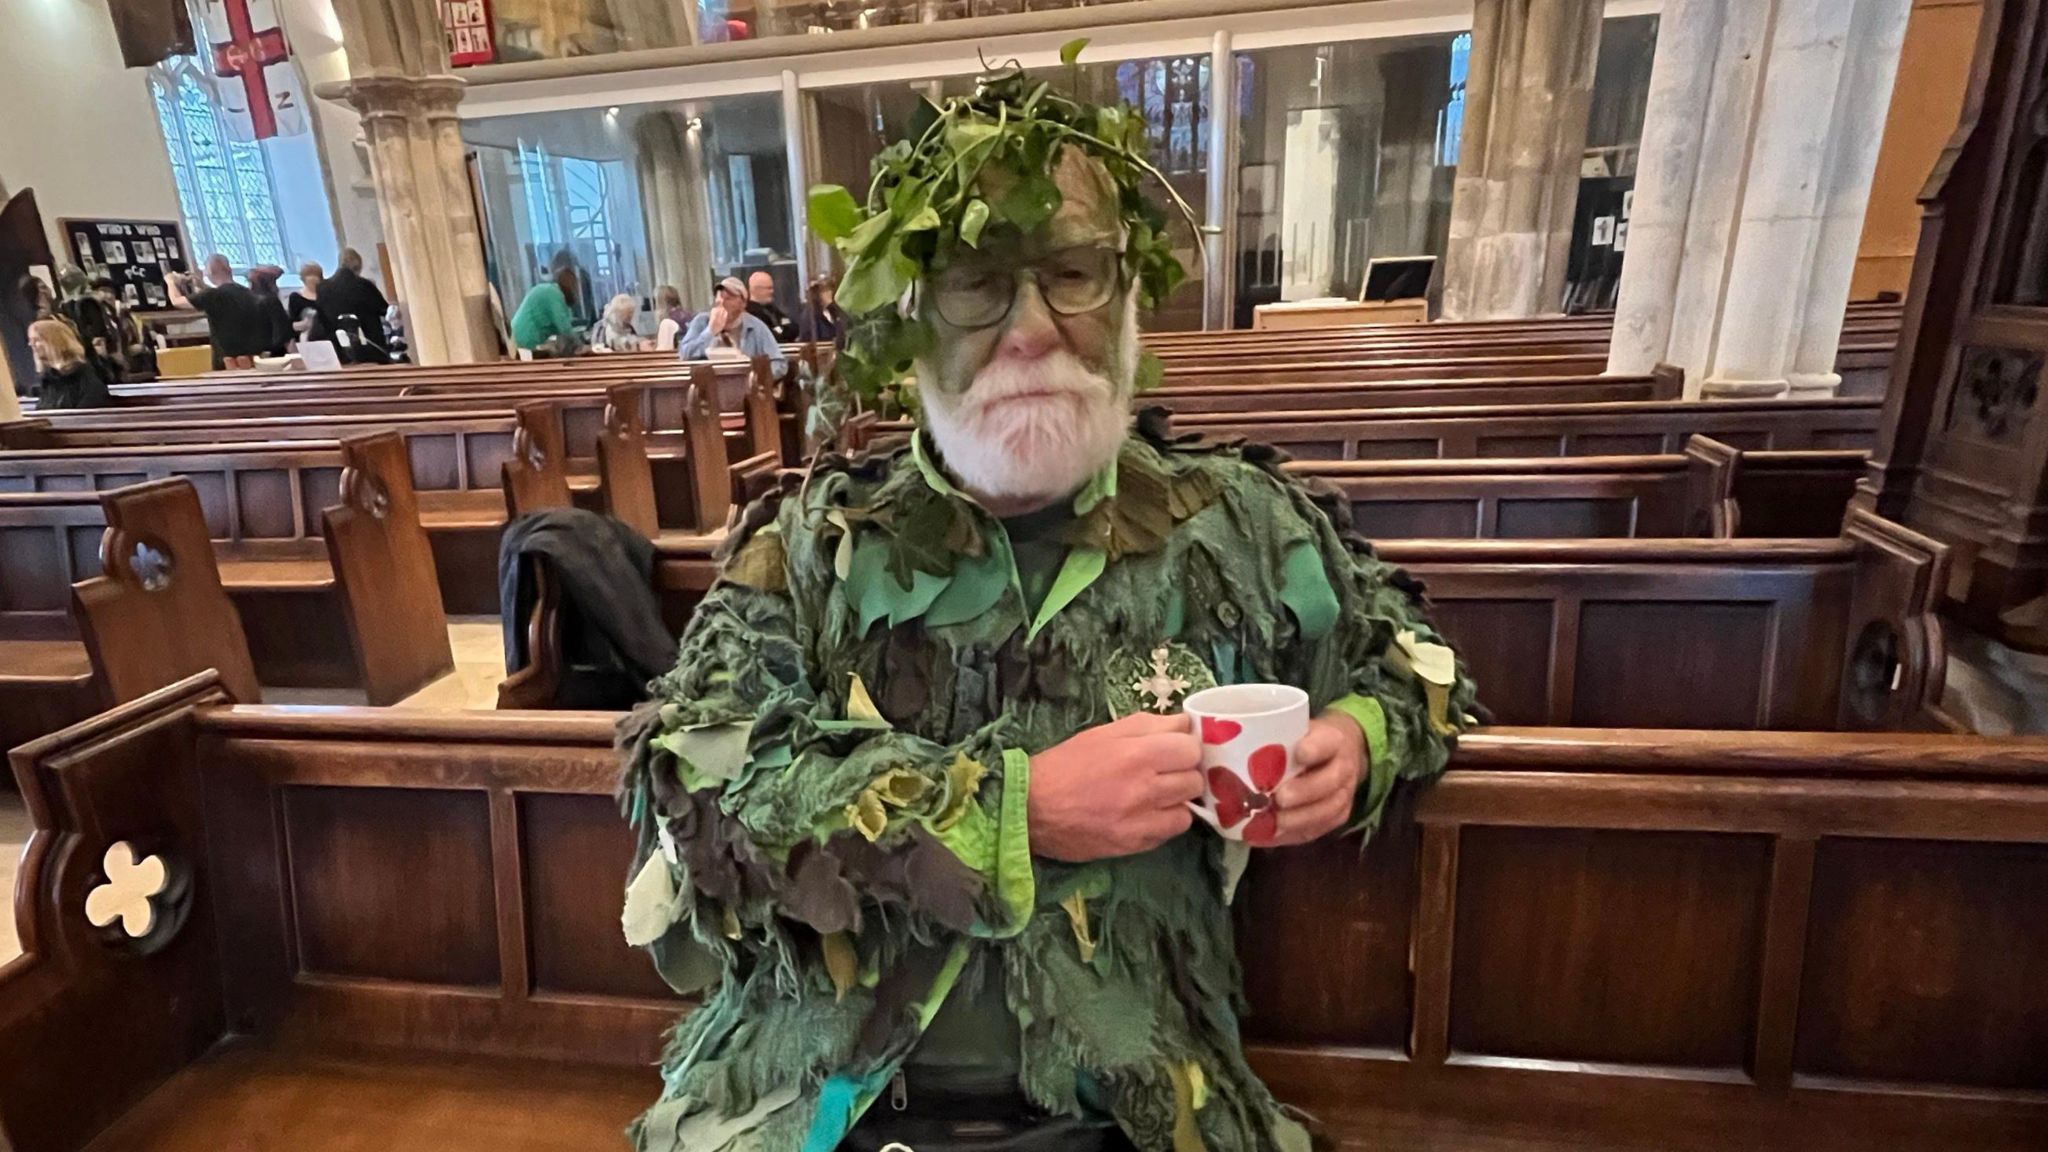 An older man with a white heard is painted in emerald green and wears a multi-shade green costume drinks a cup of tea in a church pew